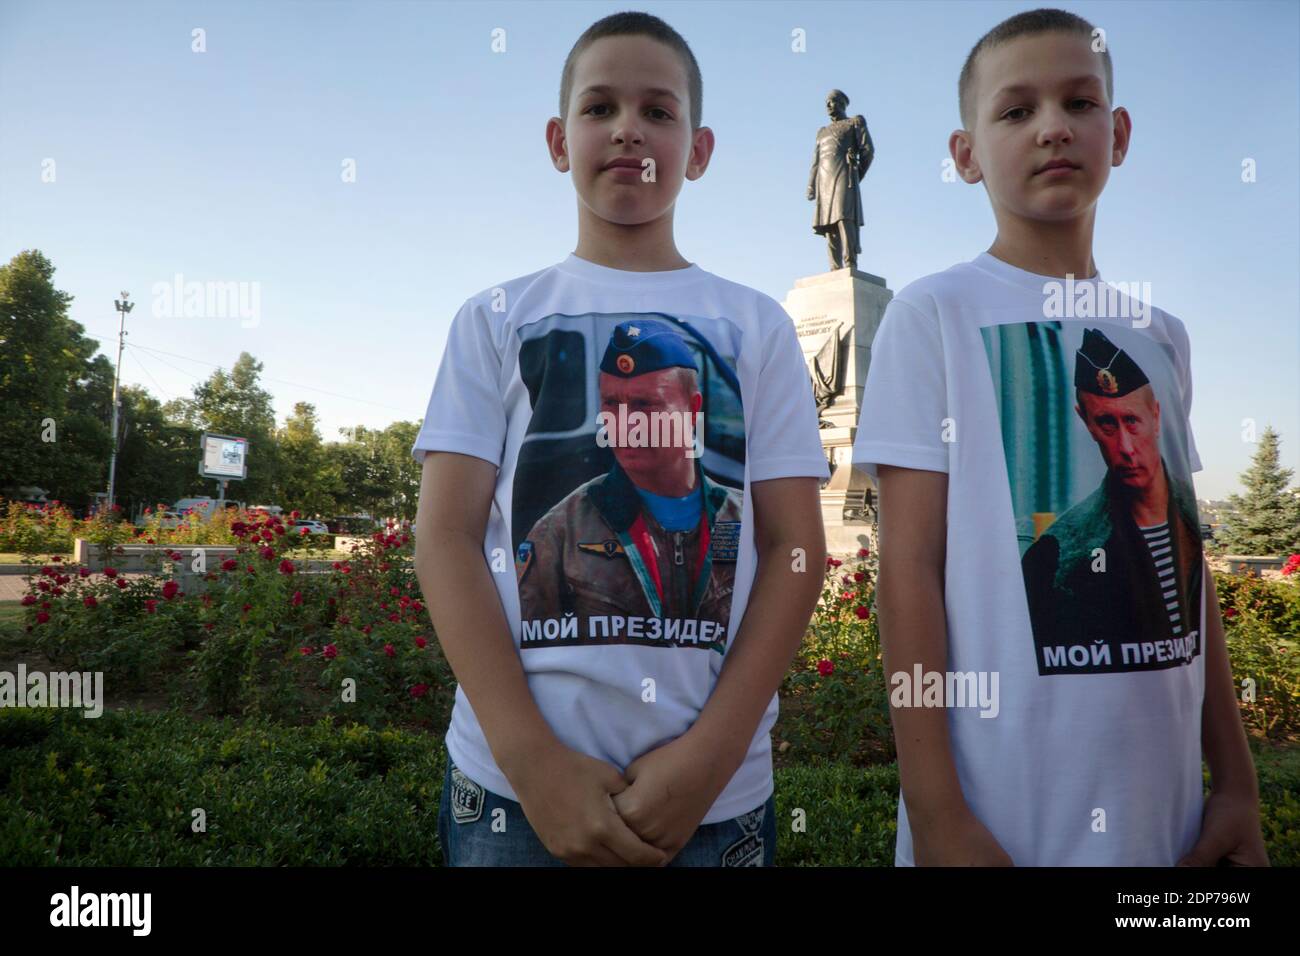 Sevastopol, Crimea, 24th of July, 2015 Boys stand on Nakhimov square with a portrait of Russian president Vladimir Putin on t-shirts against the background of the monument to Pavel Nakhimov in the center of Sevastopol city, Crimea Republic Stock Photo